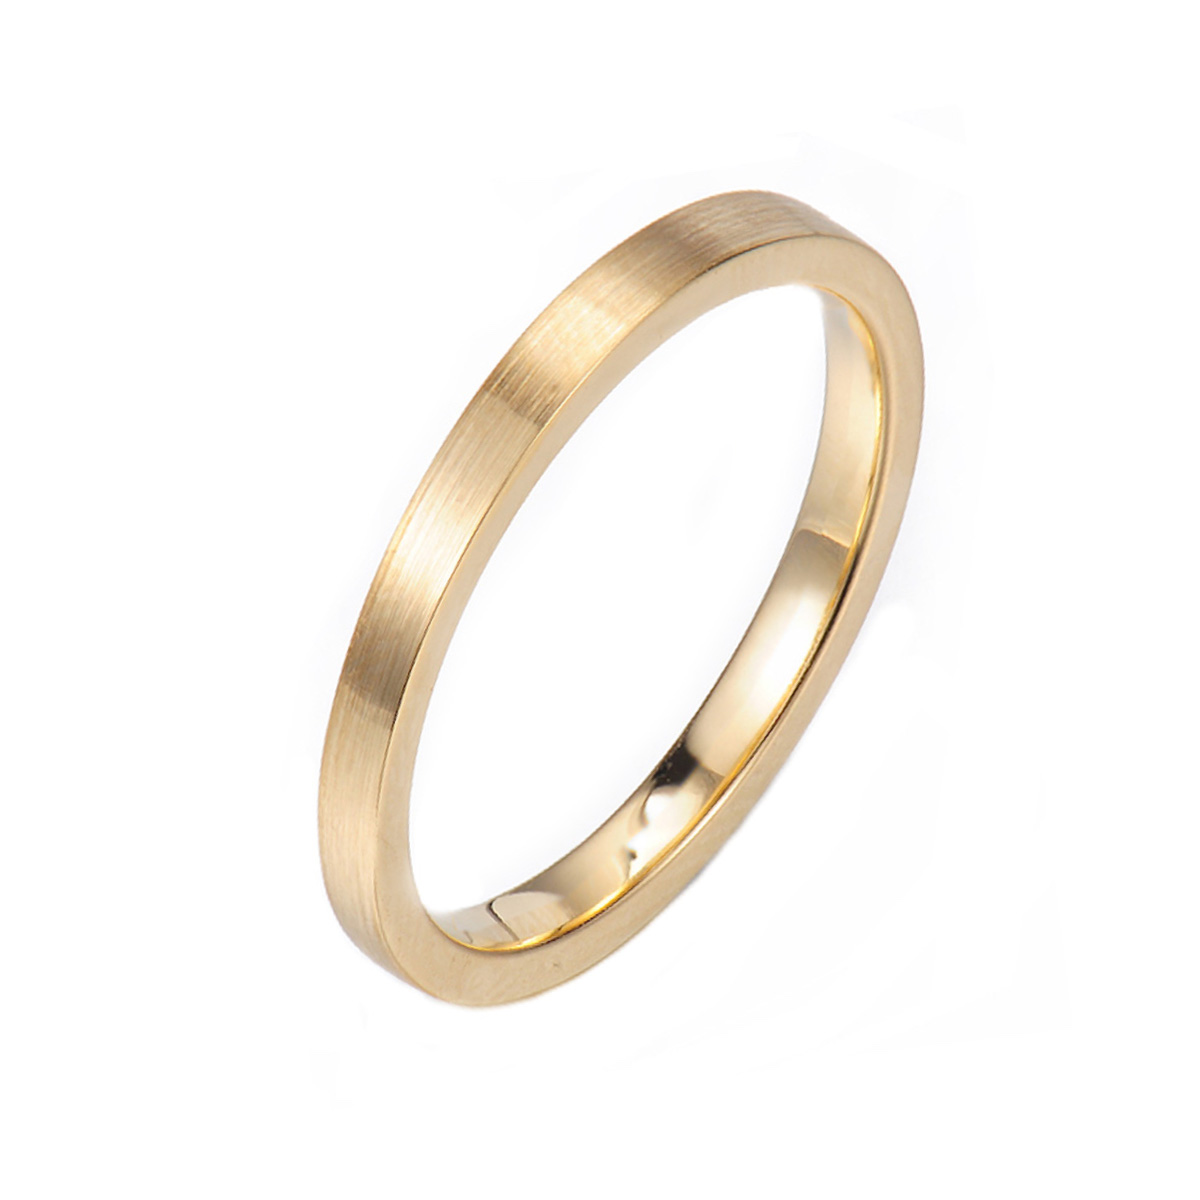 Z-Chic-square-2mm-Satin-Gold-Band-Ring-Guard-Spacer-14k-18k